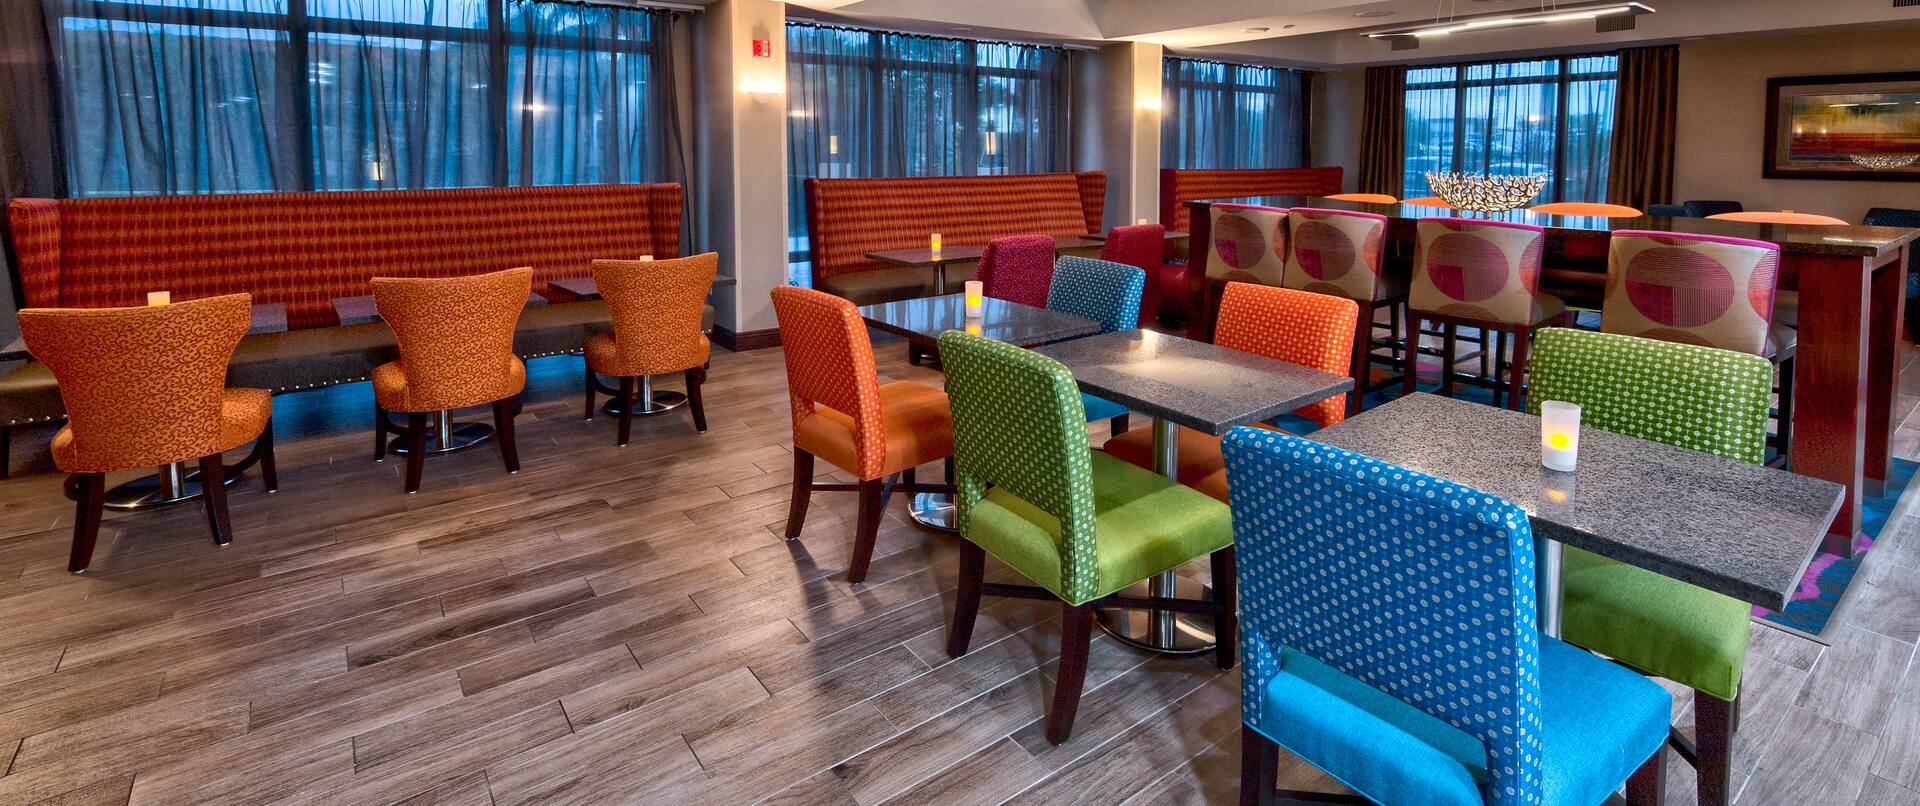 Lobby and Breakfast Seating